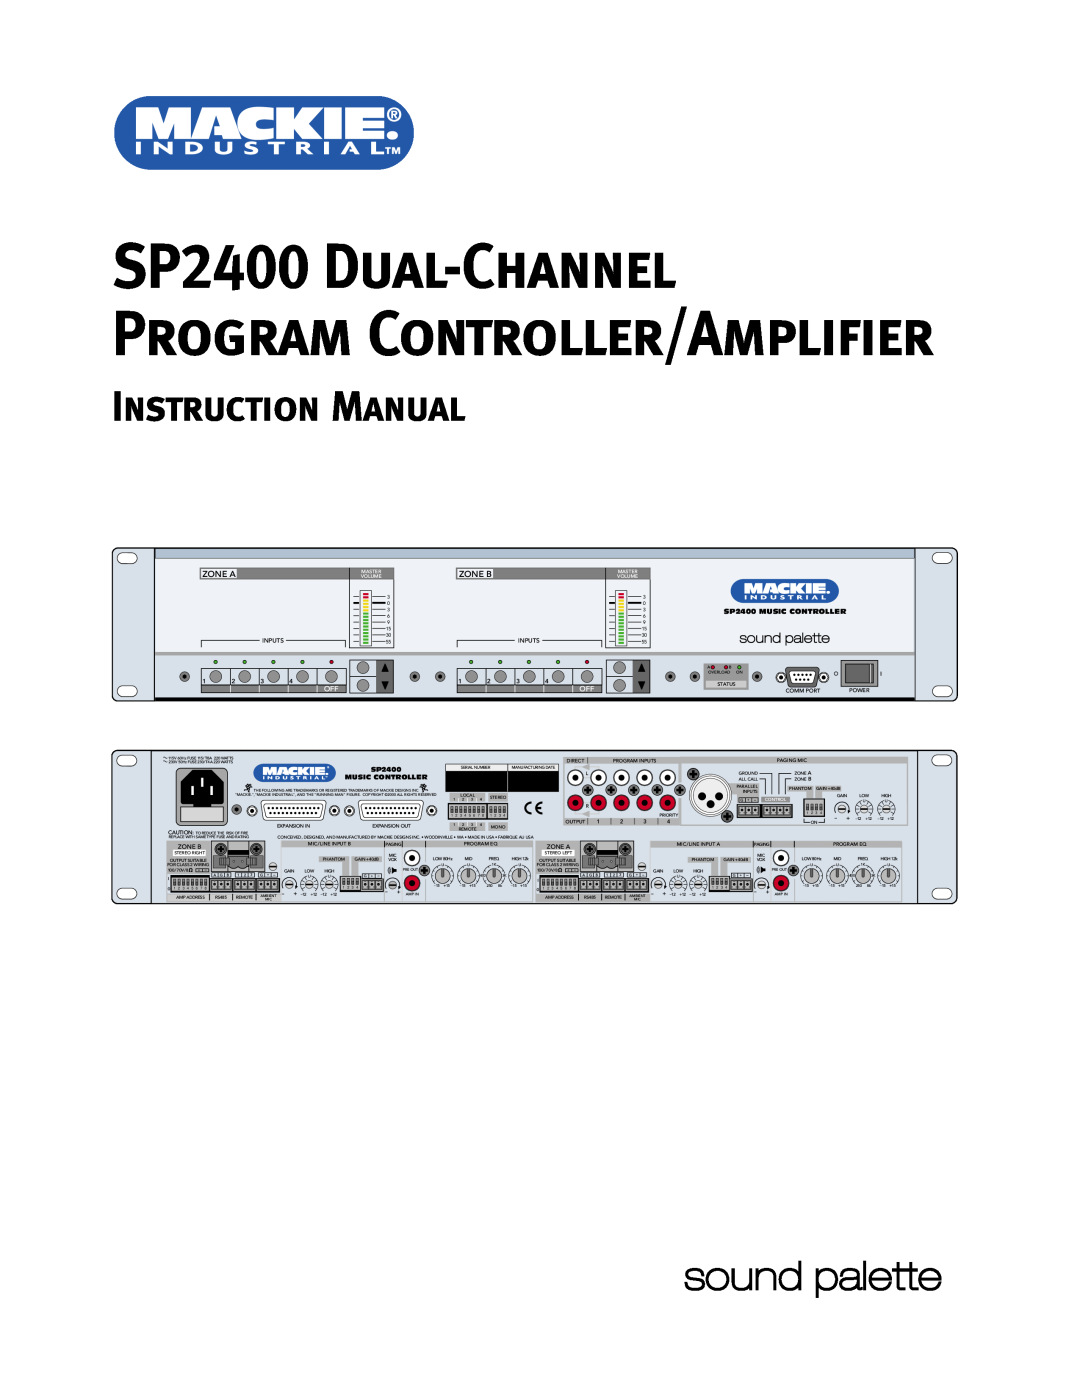 Mackie instruction manual SP2400 Dual-ChannelProgram Controller/Amplifier, Zone A, Zone B 